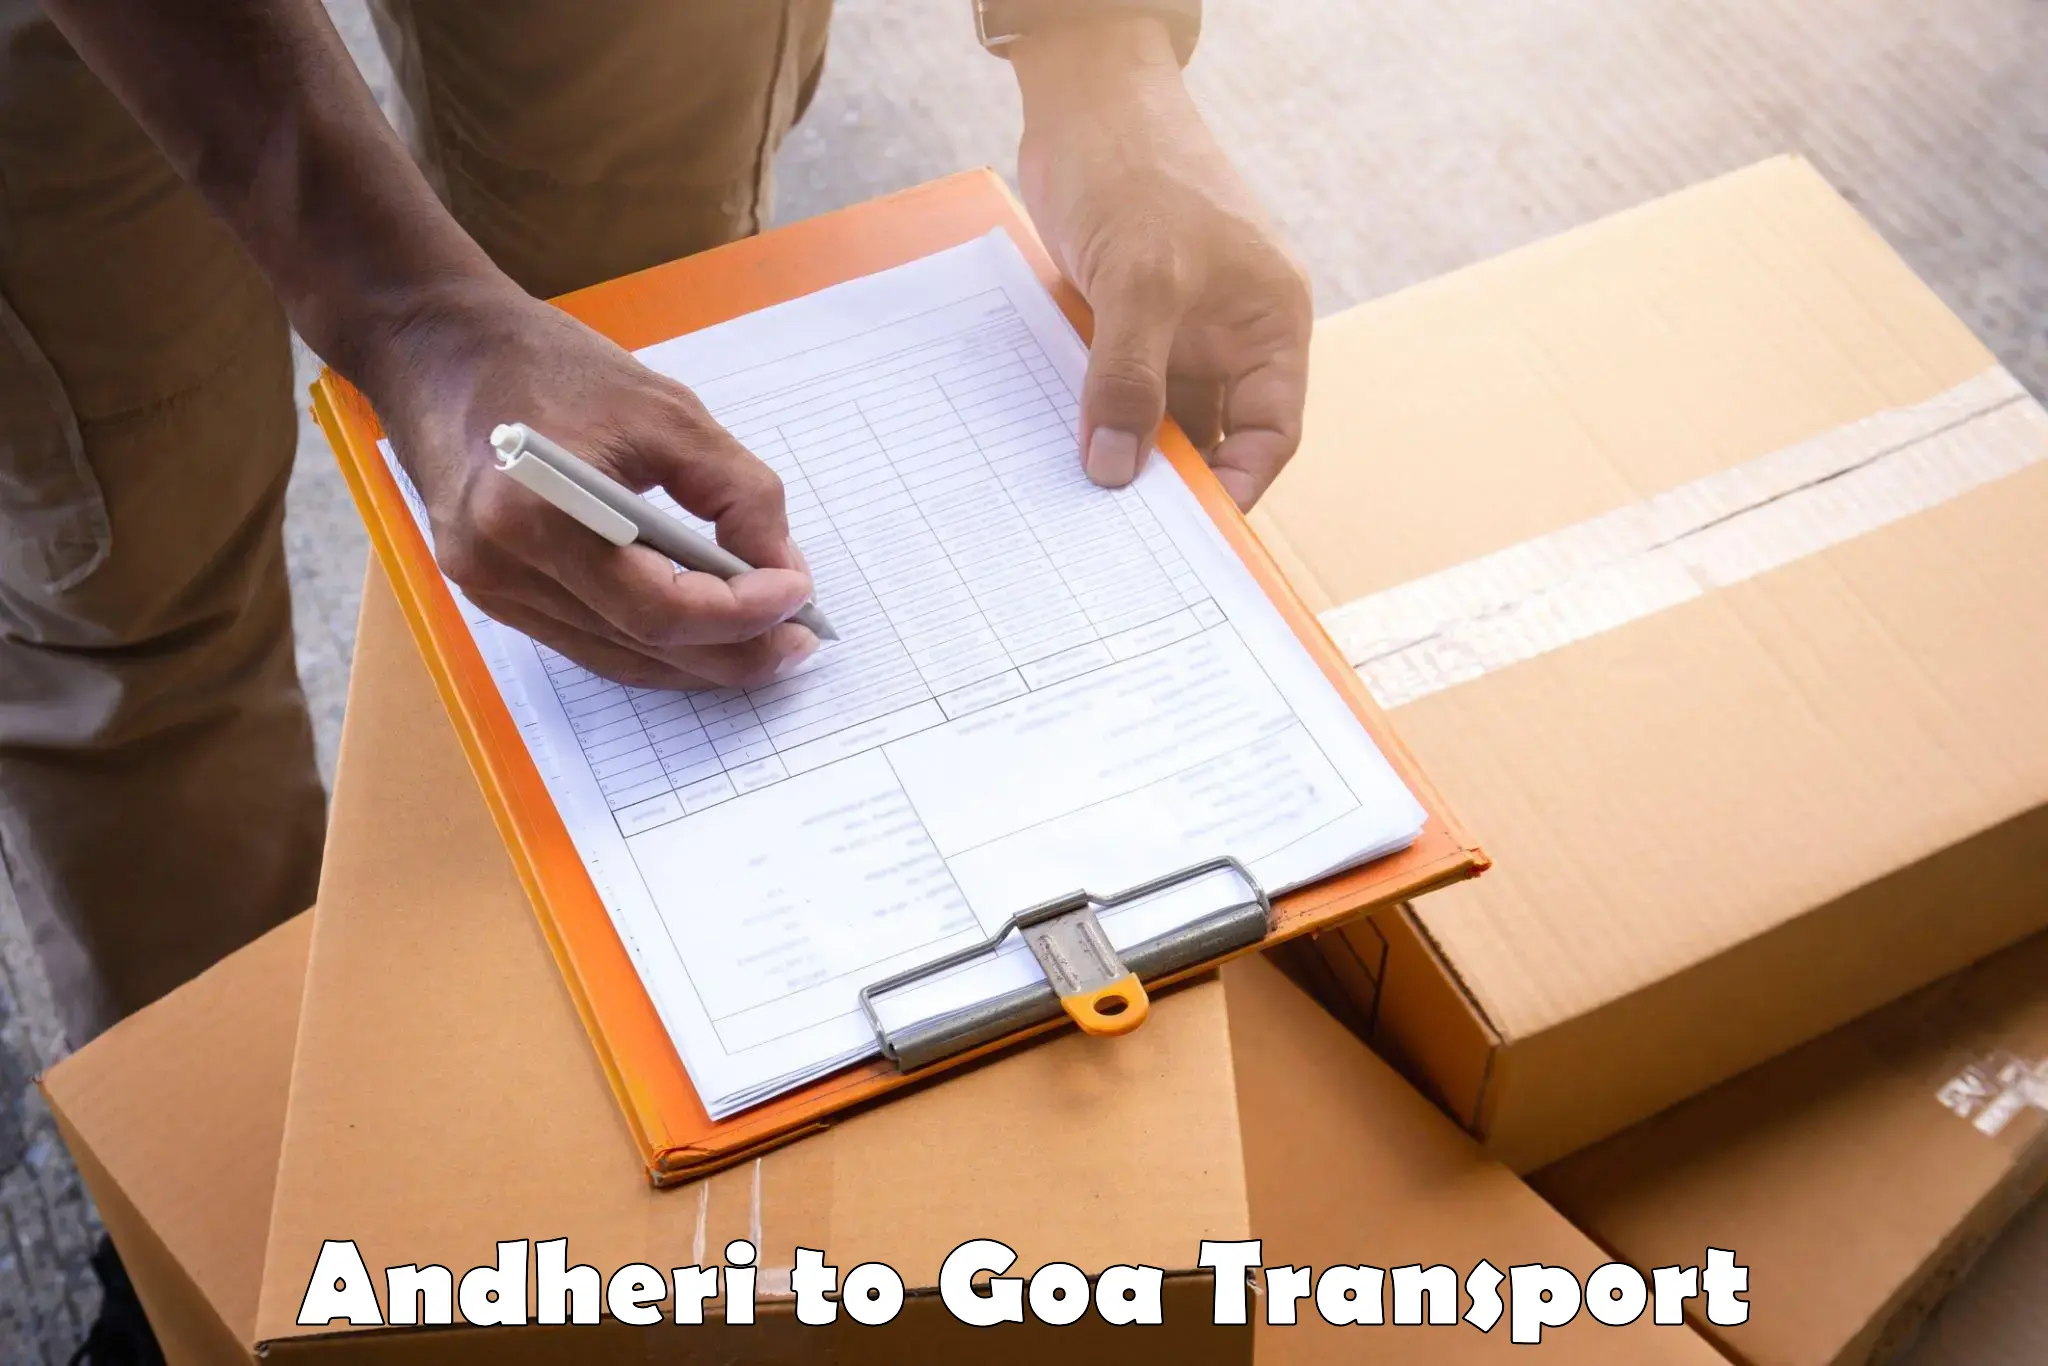 Nearby transport service Andheri to IIT Goa